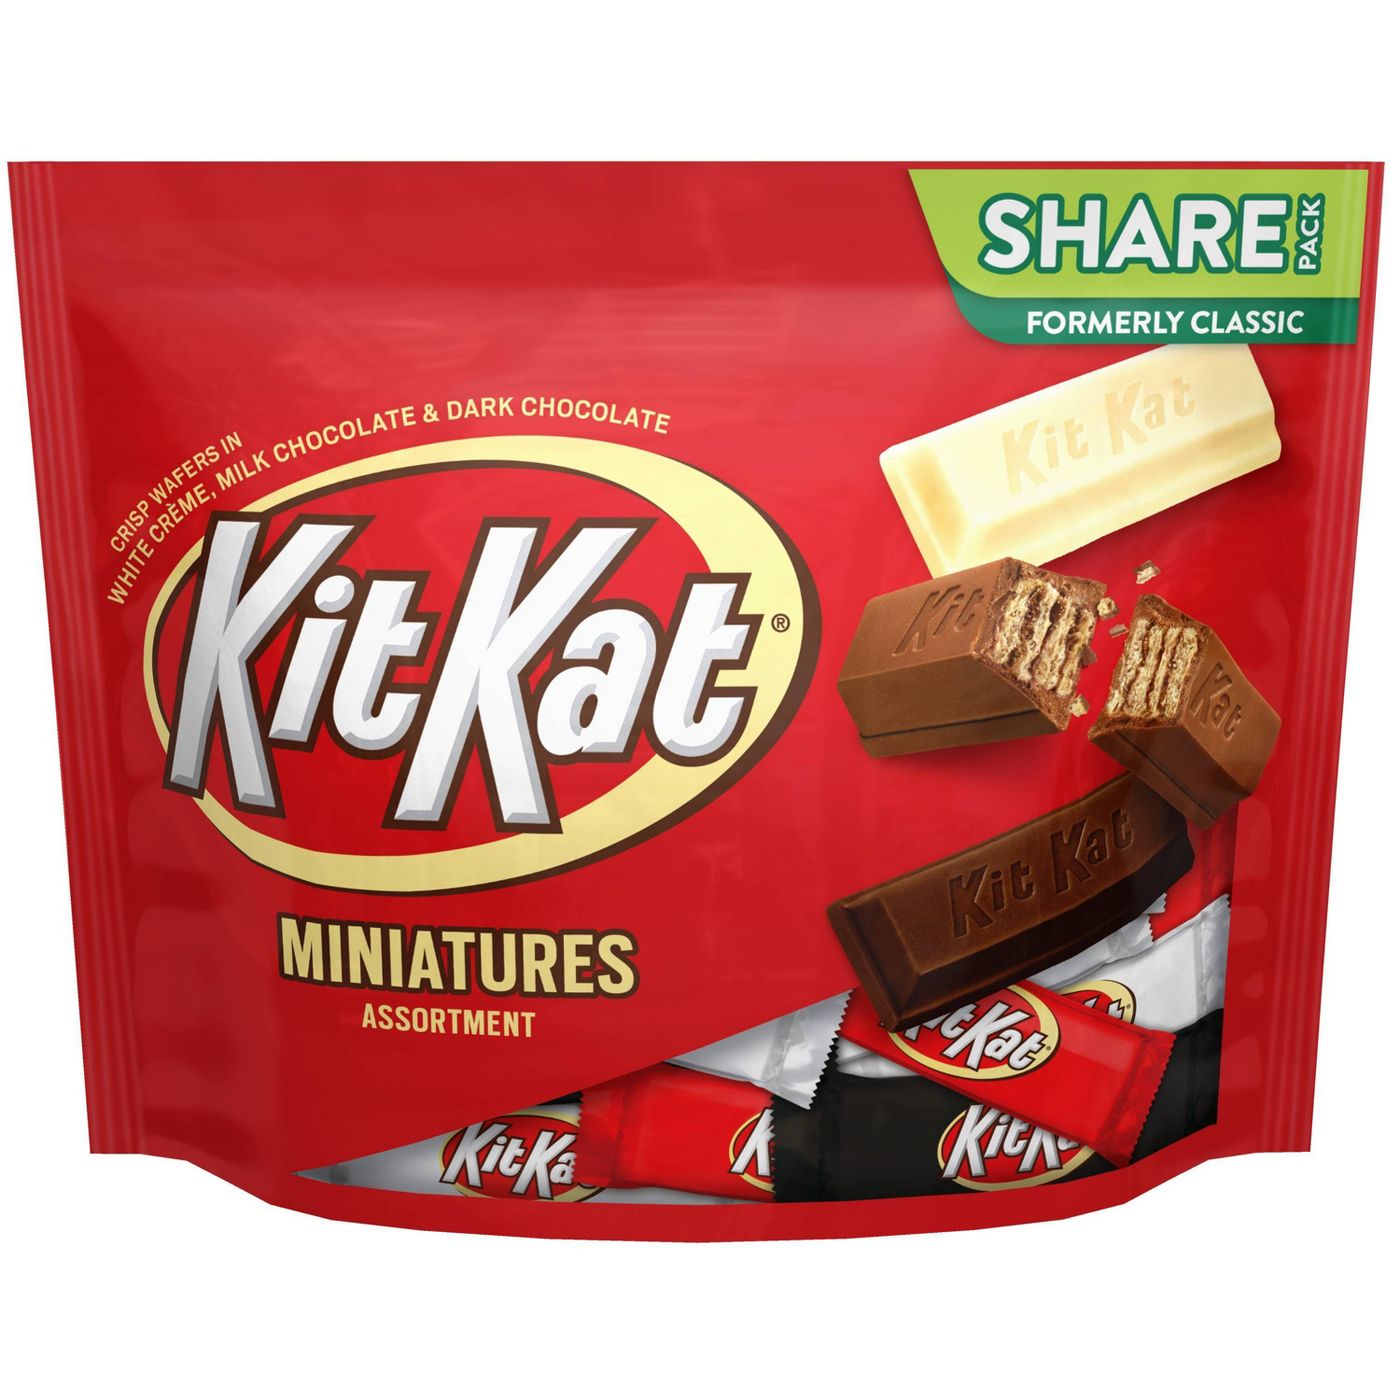 Kit Kat Assorted Miniatures Chocolate Candy, Share Pack, 10.1oz